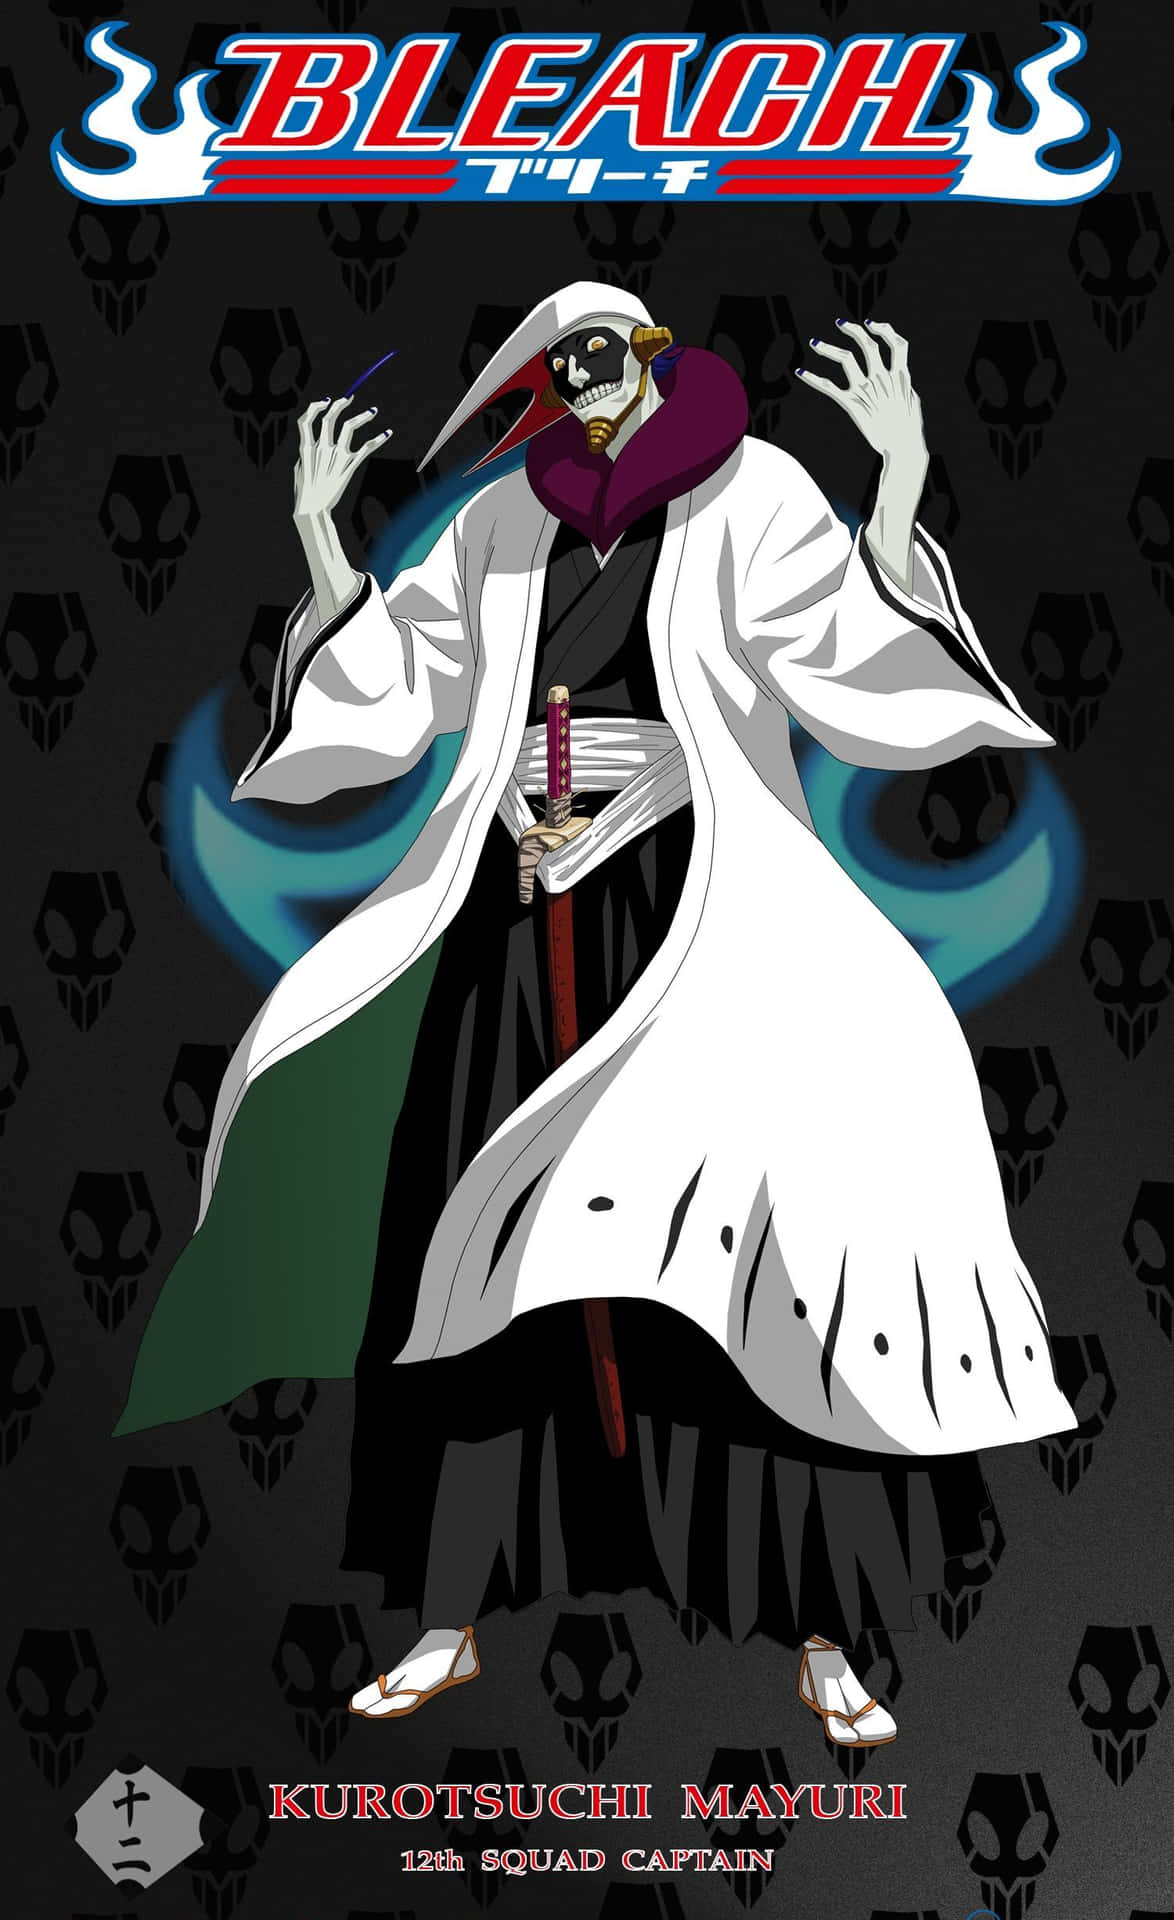 Mayuri Kurotsuchi, Leader of the 12th Division in the Gotei 13, as seen in the anime series 'Bleach'. Wallpaper